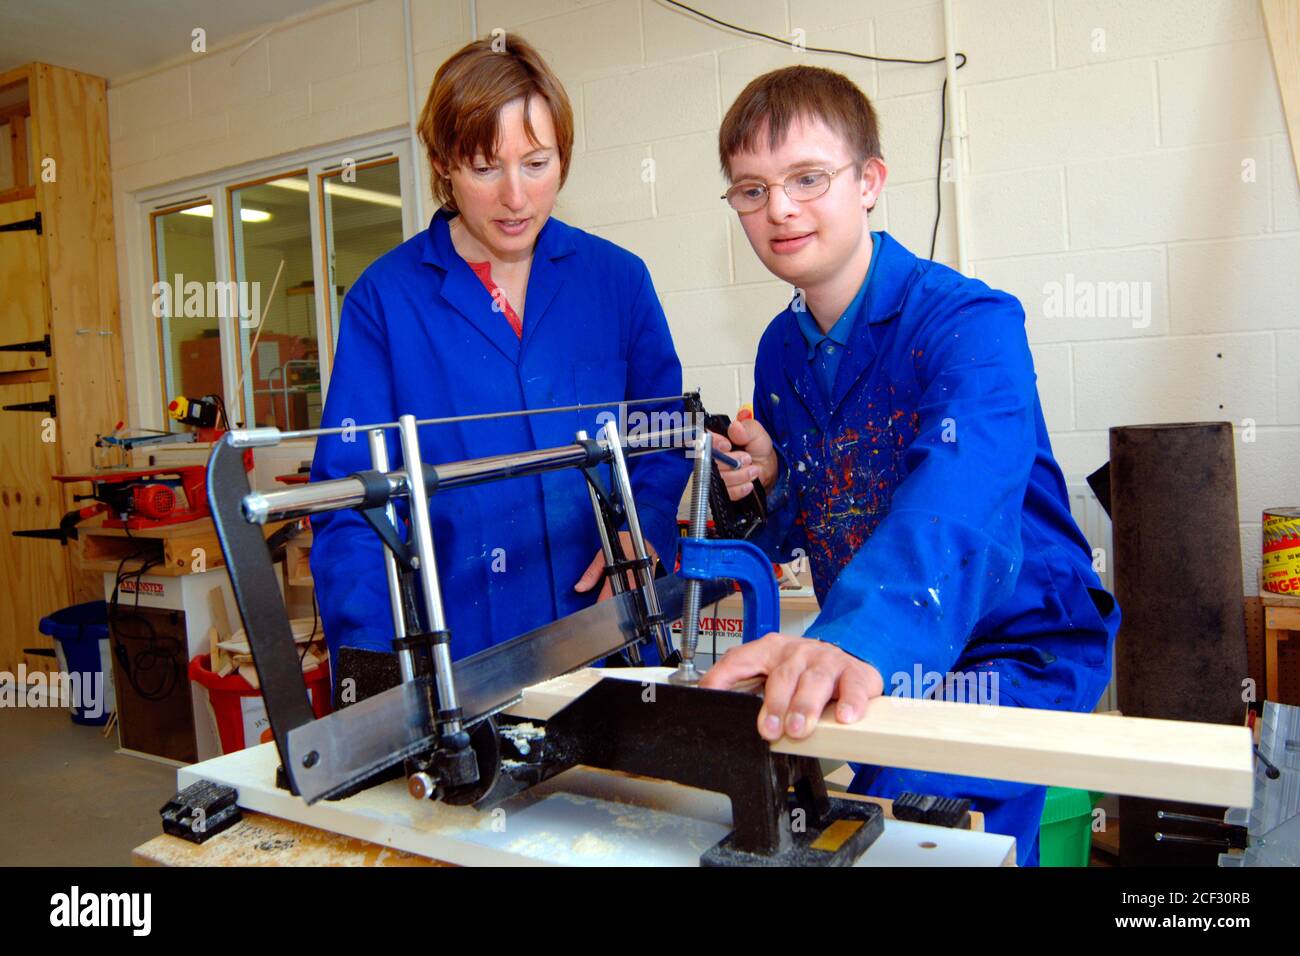 Young man with Downs Syndrome learning how to use saw at a workshop for craftspeople with learning disabilities UK Stock Photo